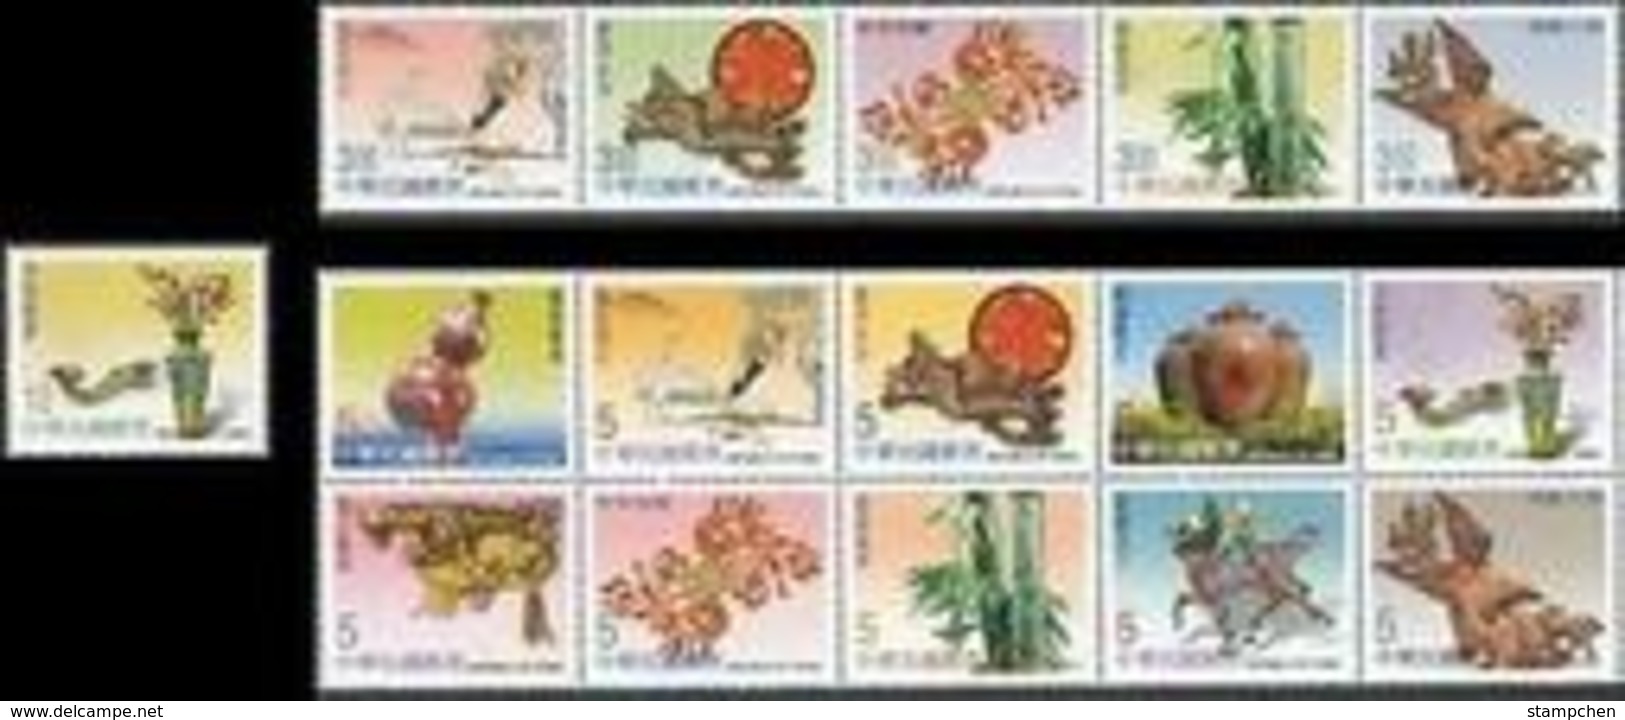 2003 Greeting Stamps Crane Bamboo Fish Scepter Coin Peony Flower Love Liquors Duck Eagle Turtle - Bäume